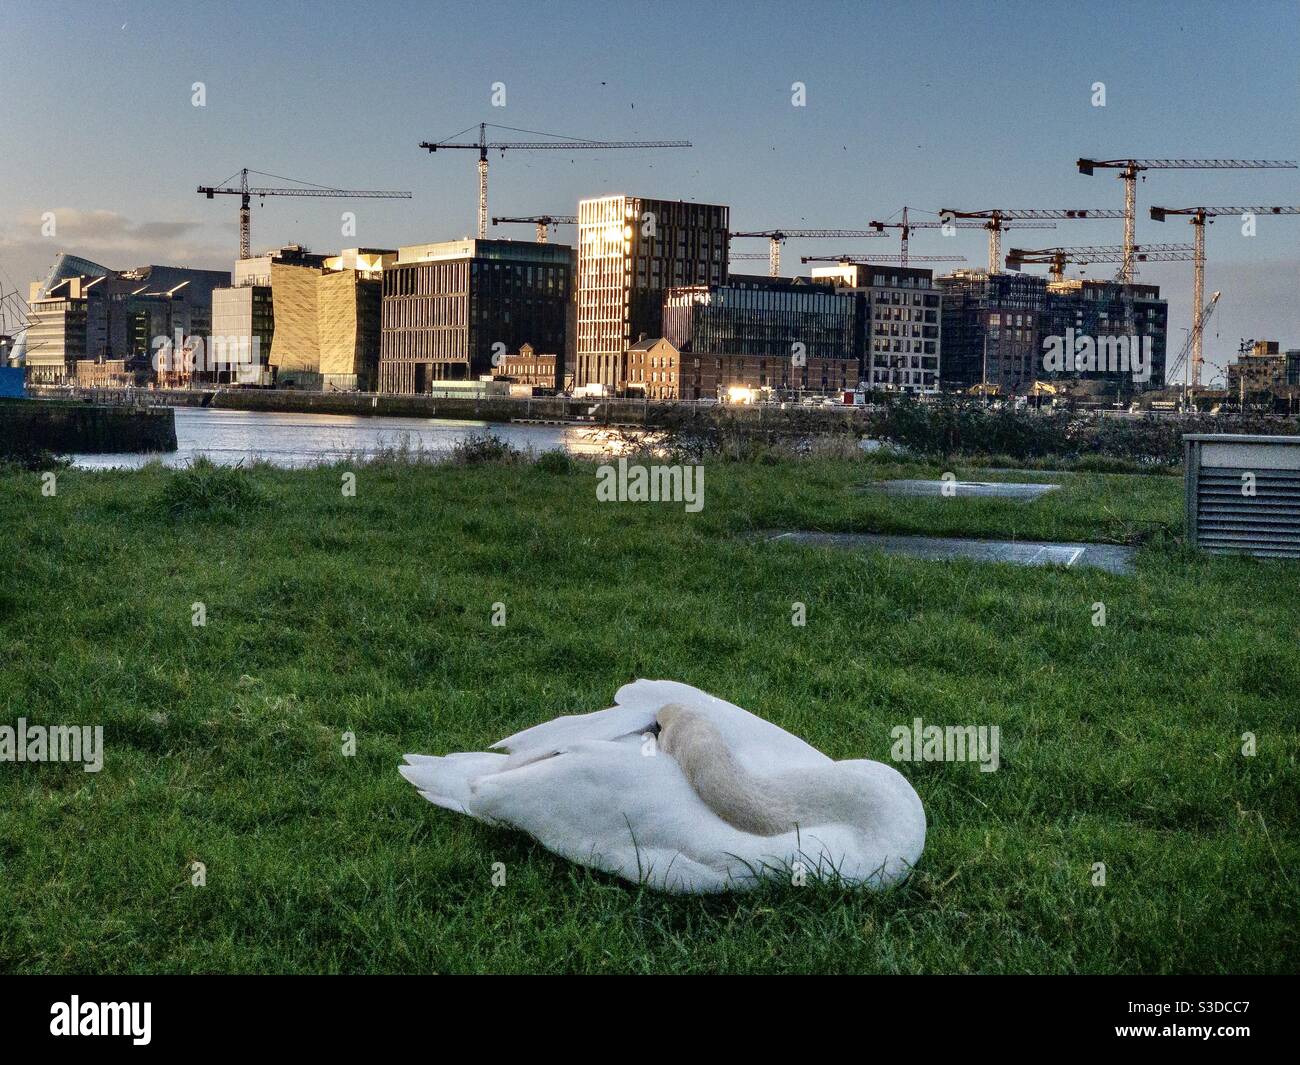 A swan sleeps by the River Liffey in Ringsend Dublin Ireland. Dock land construction and development in the background Stock Photo